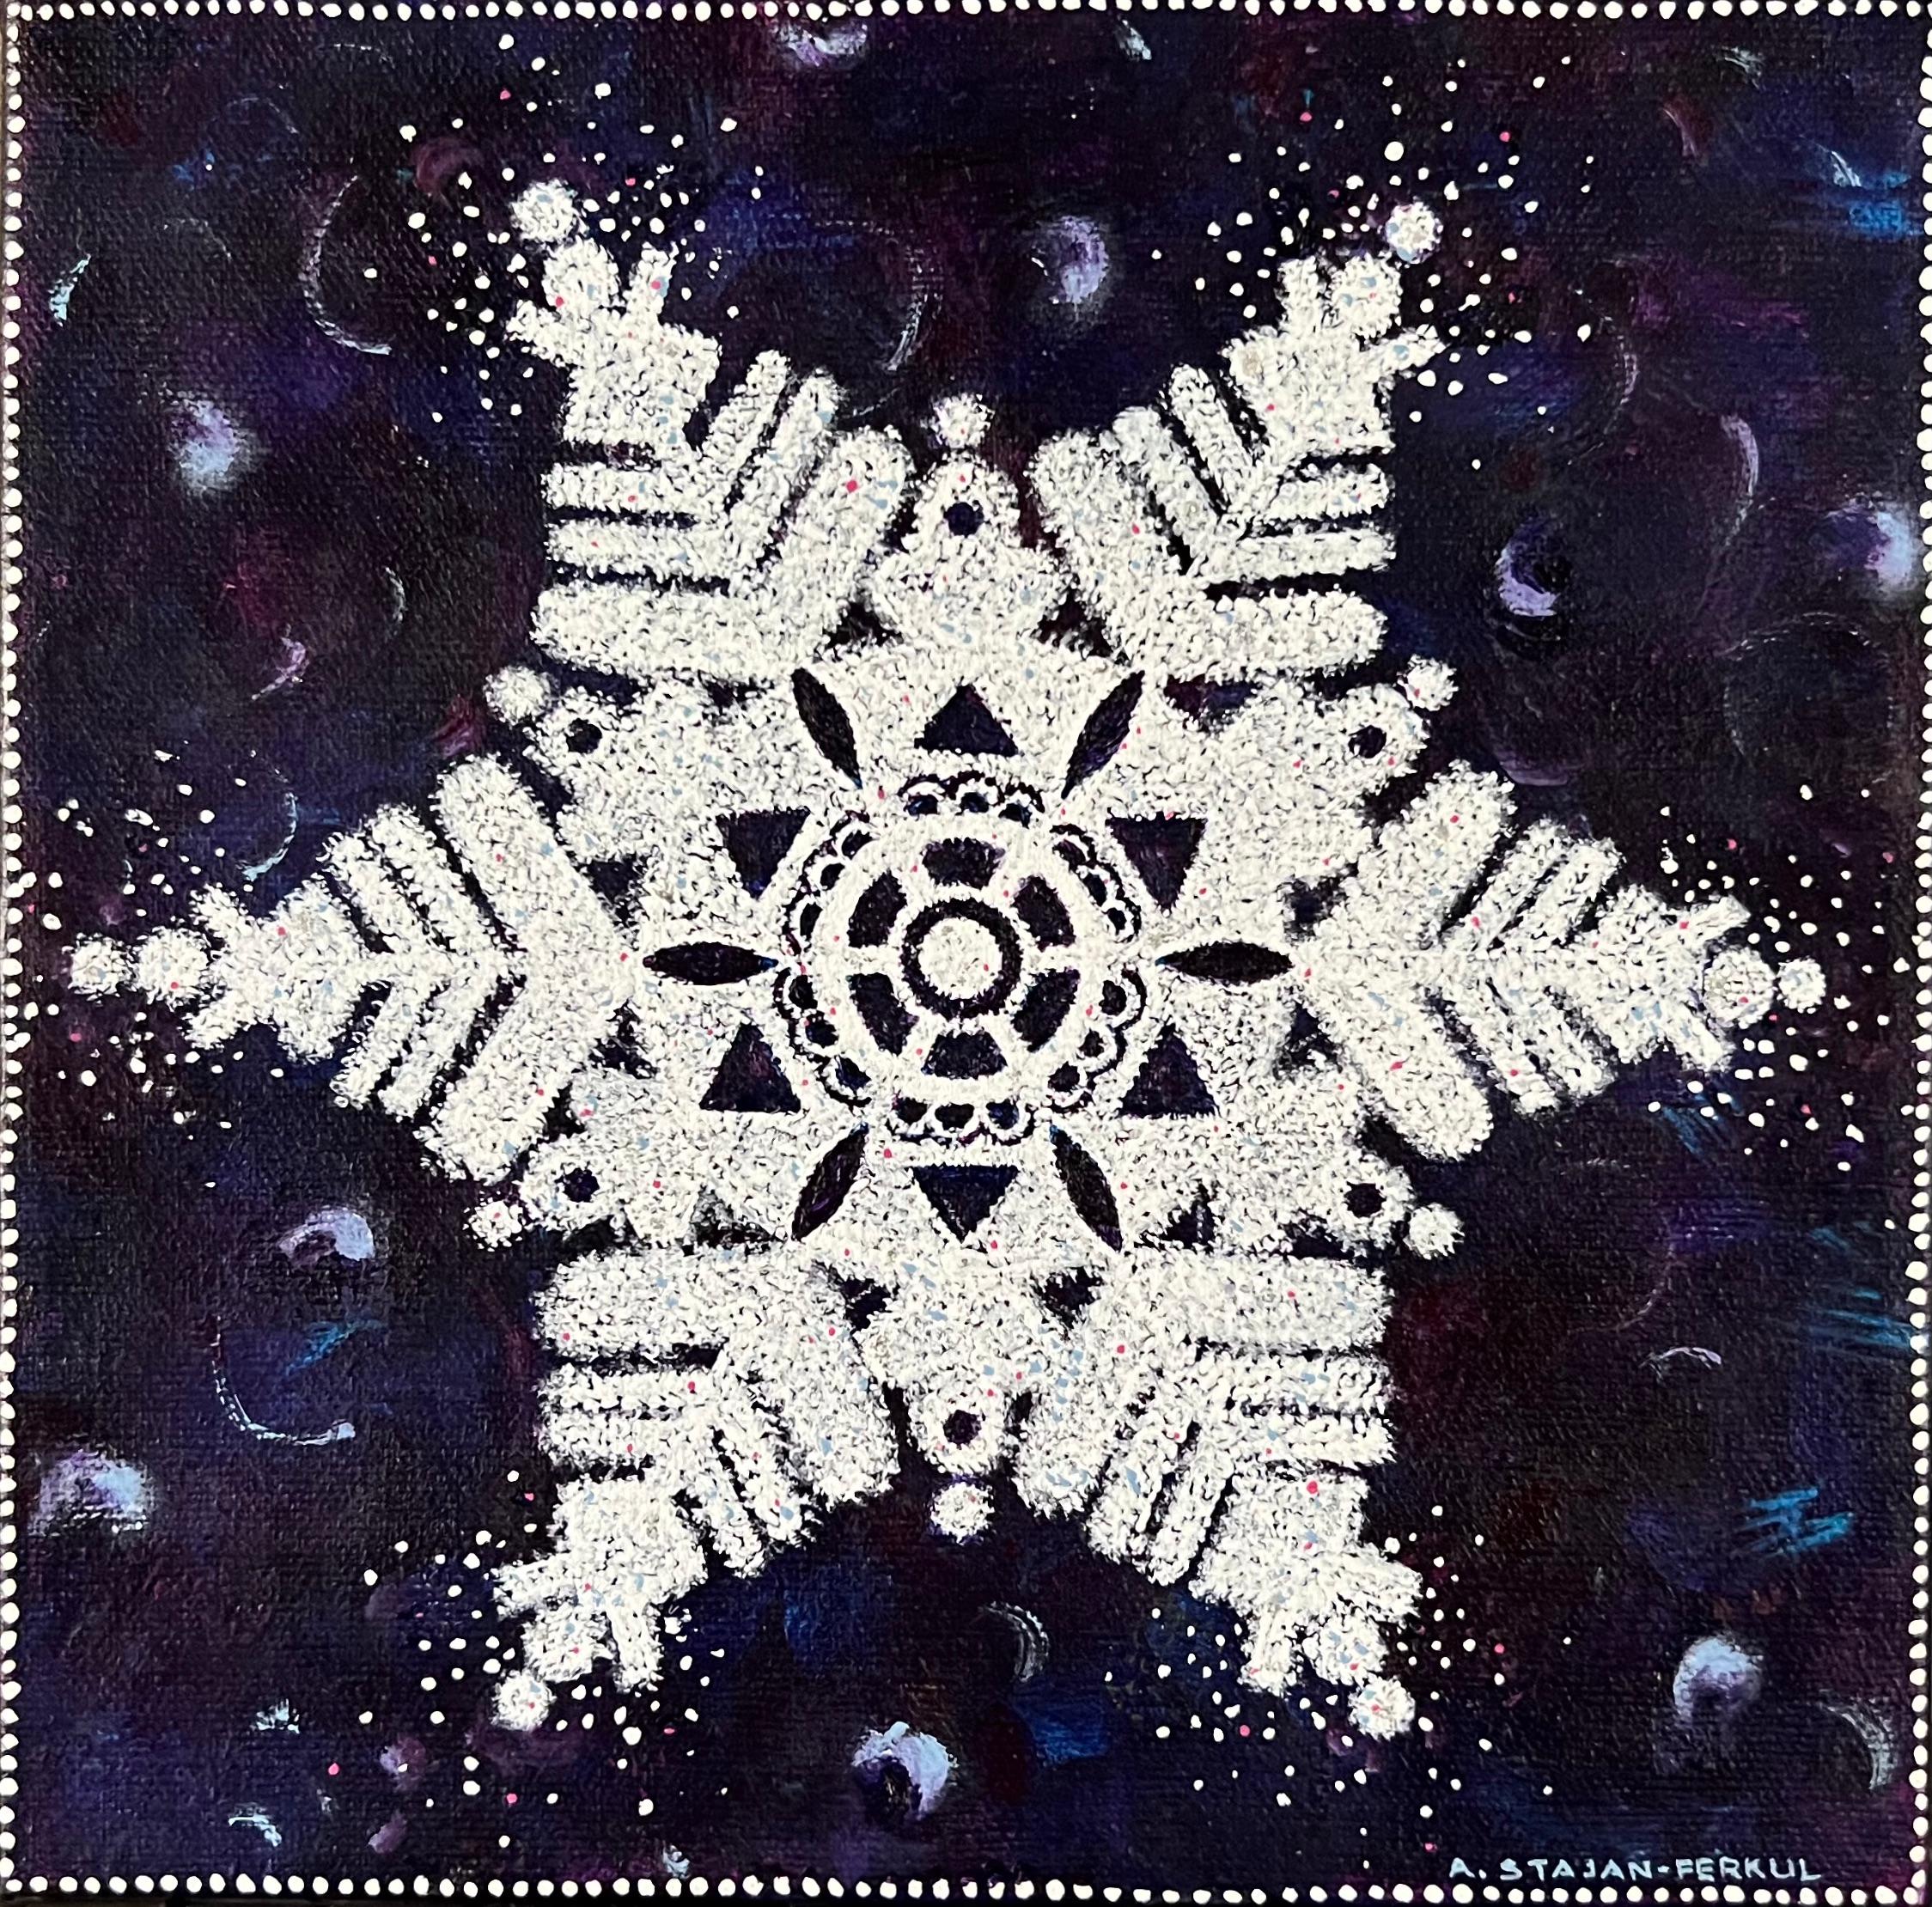 Andrea Stajan-Ferkul Landscape Painting - Snowflake In The Sky, 8"x8", Blue, White, Winter, Snow, Star, Christmas Painting